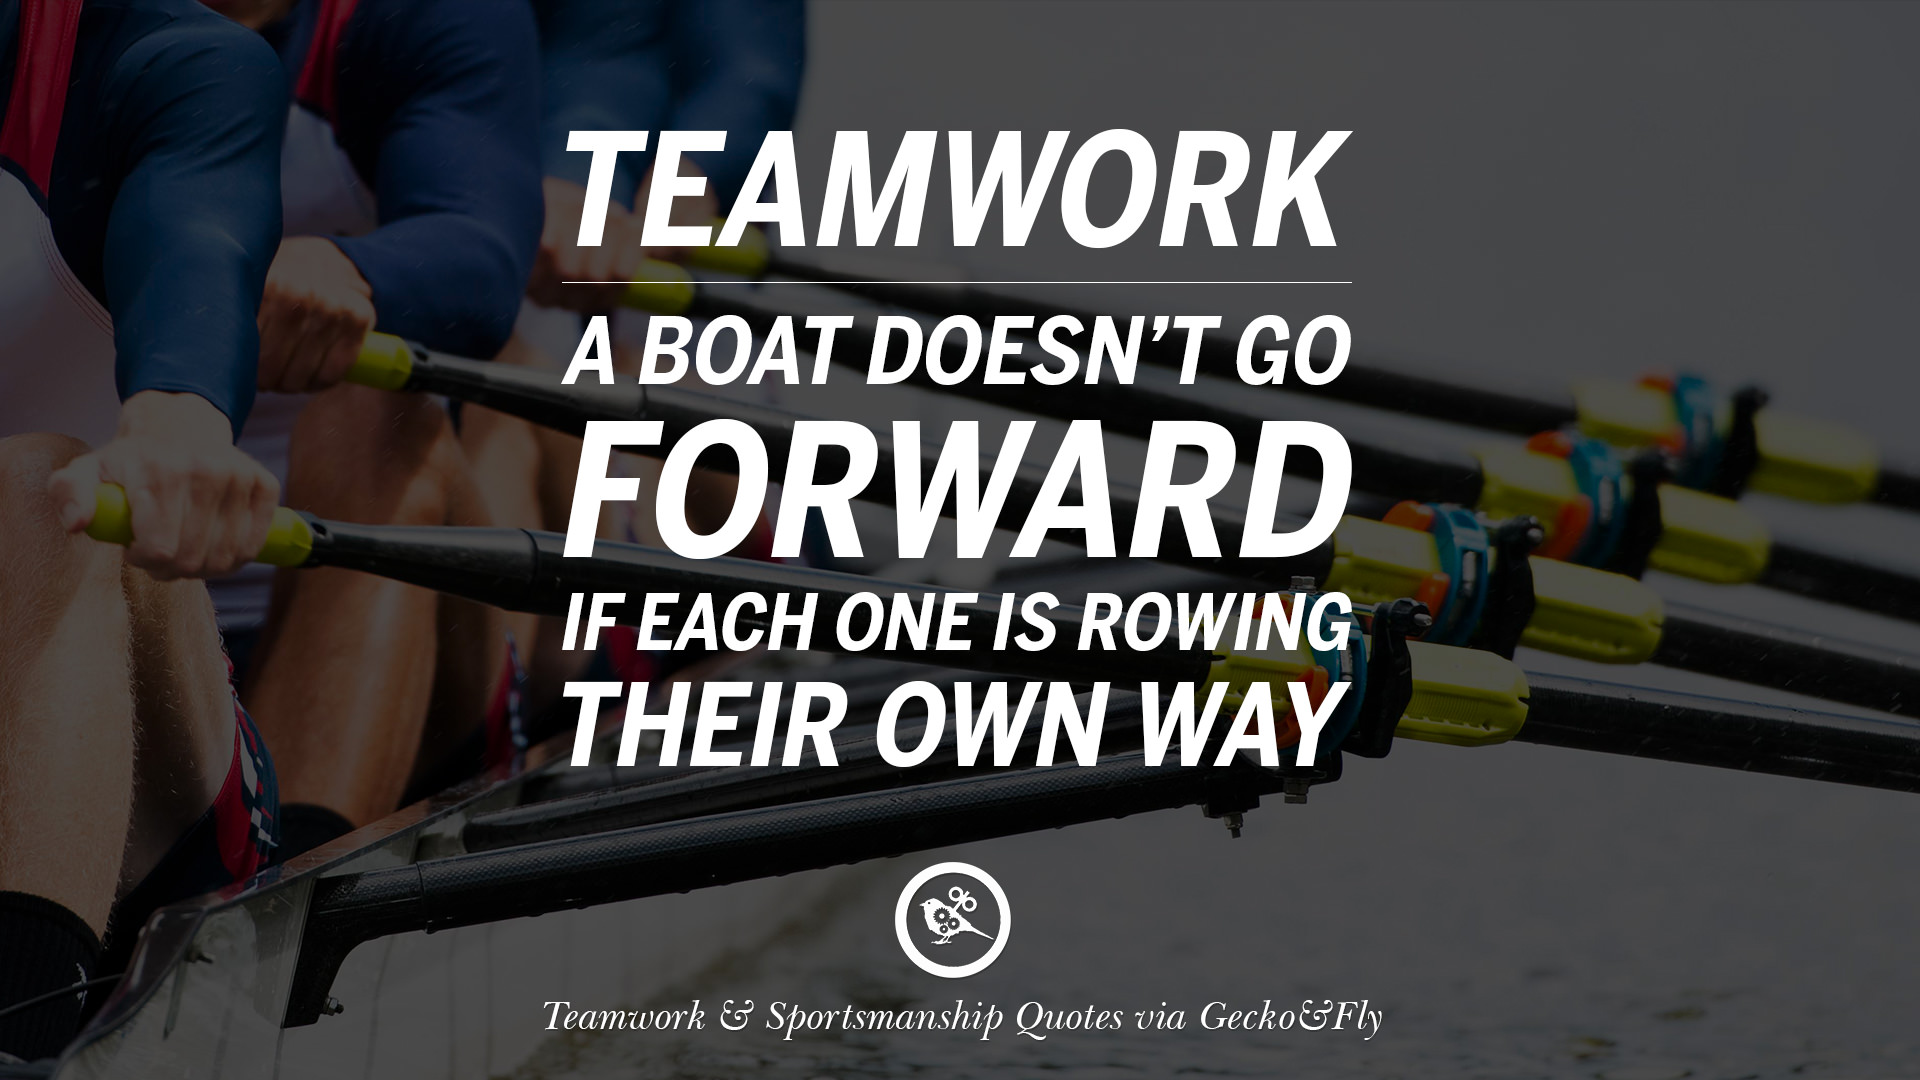 Bill Gates Funny Quotes 50 Inspirational Quotes About Teamwork And Sportsmanship